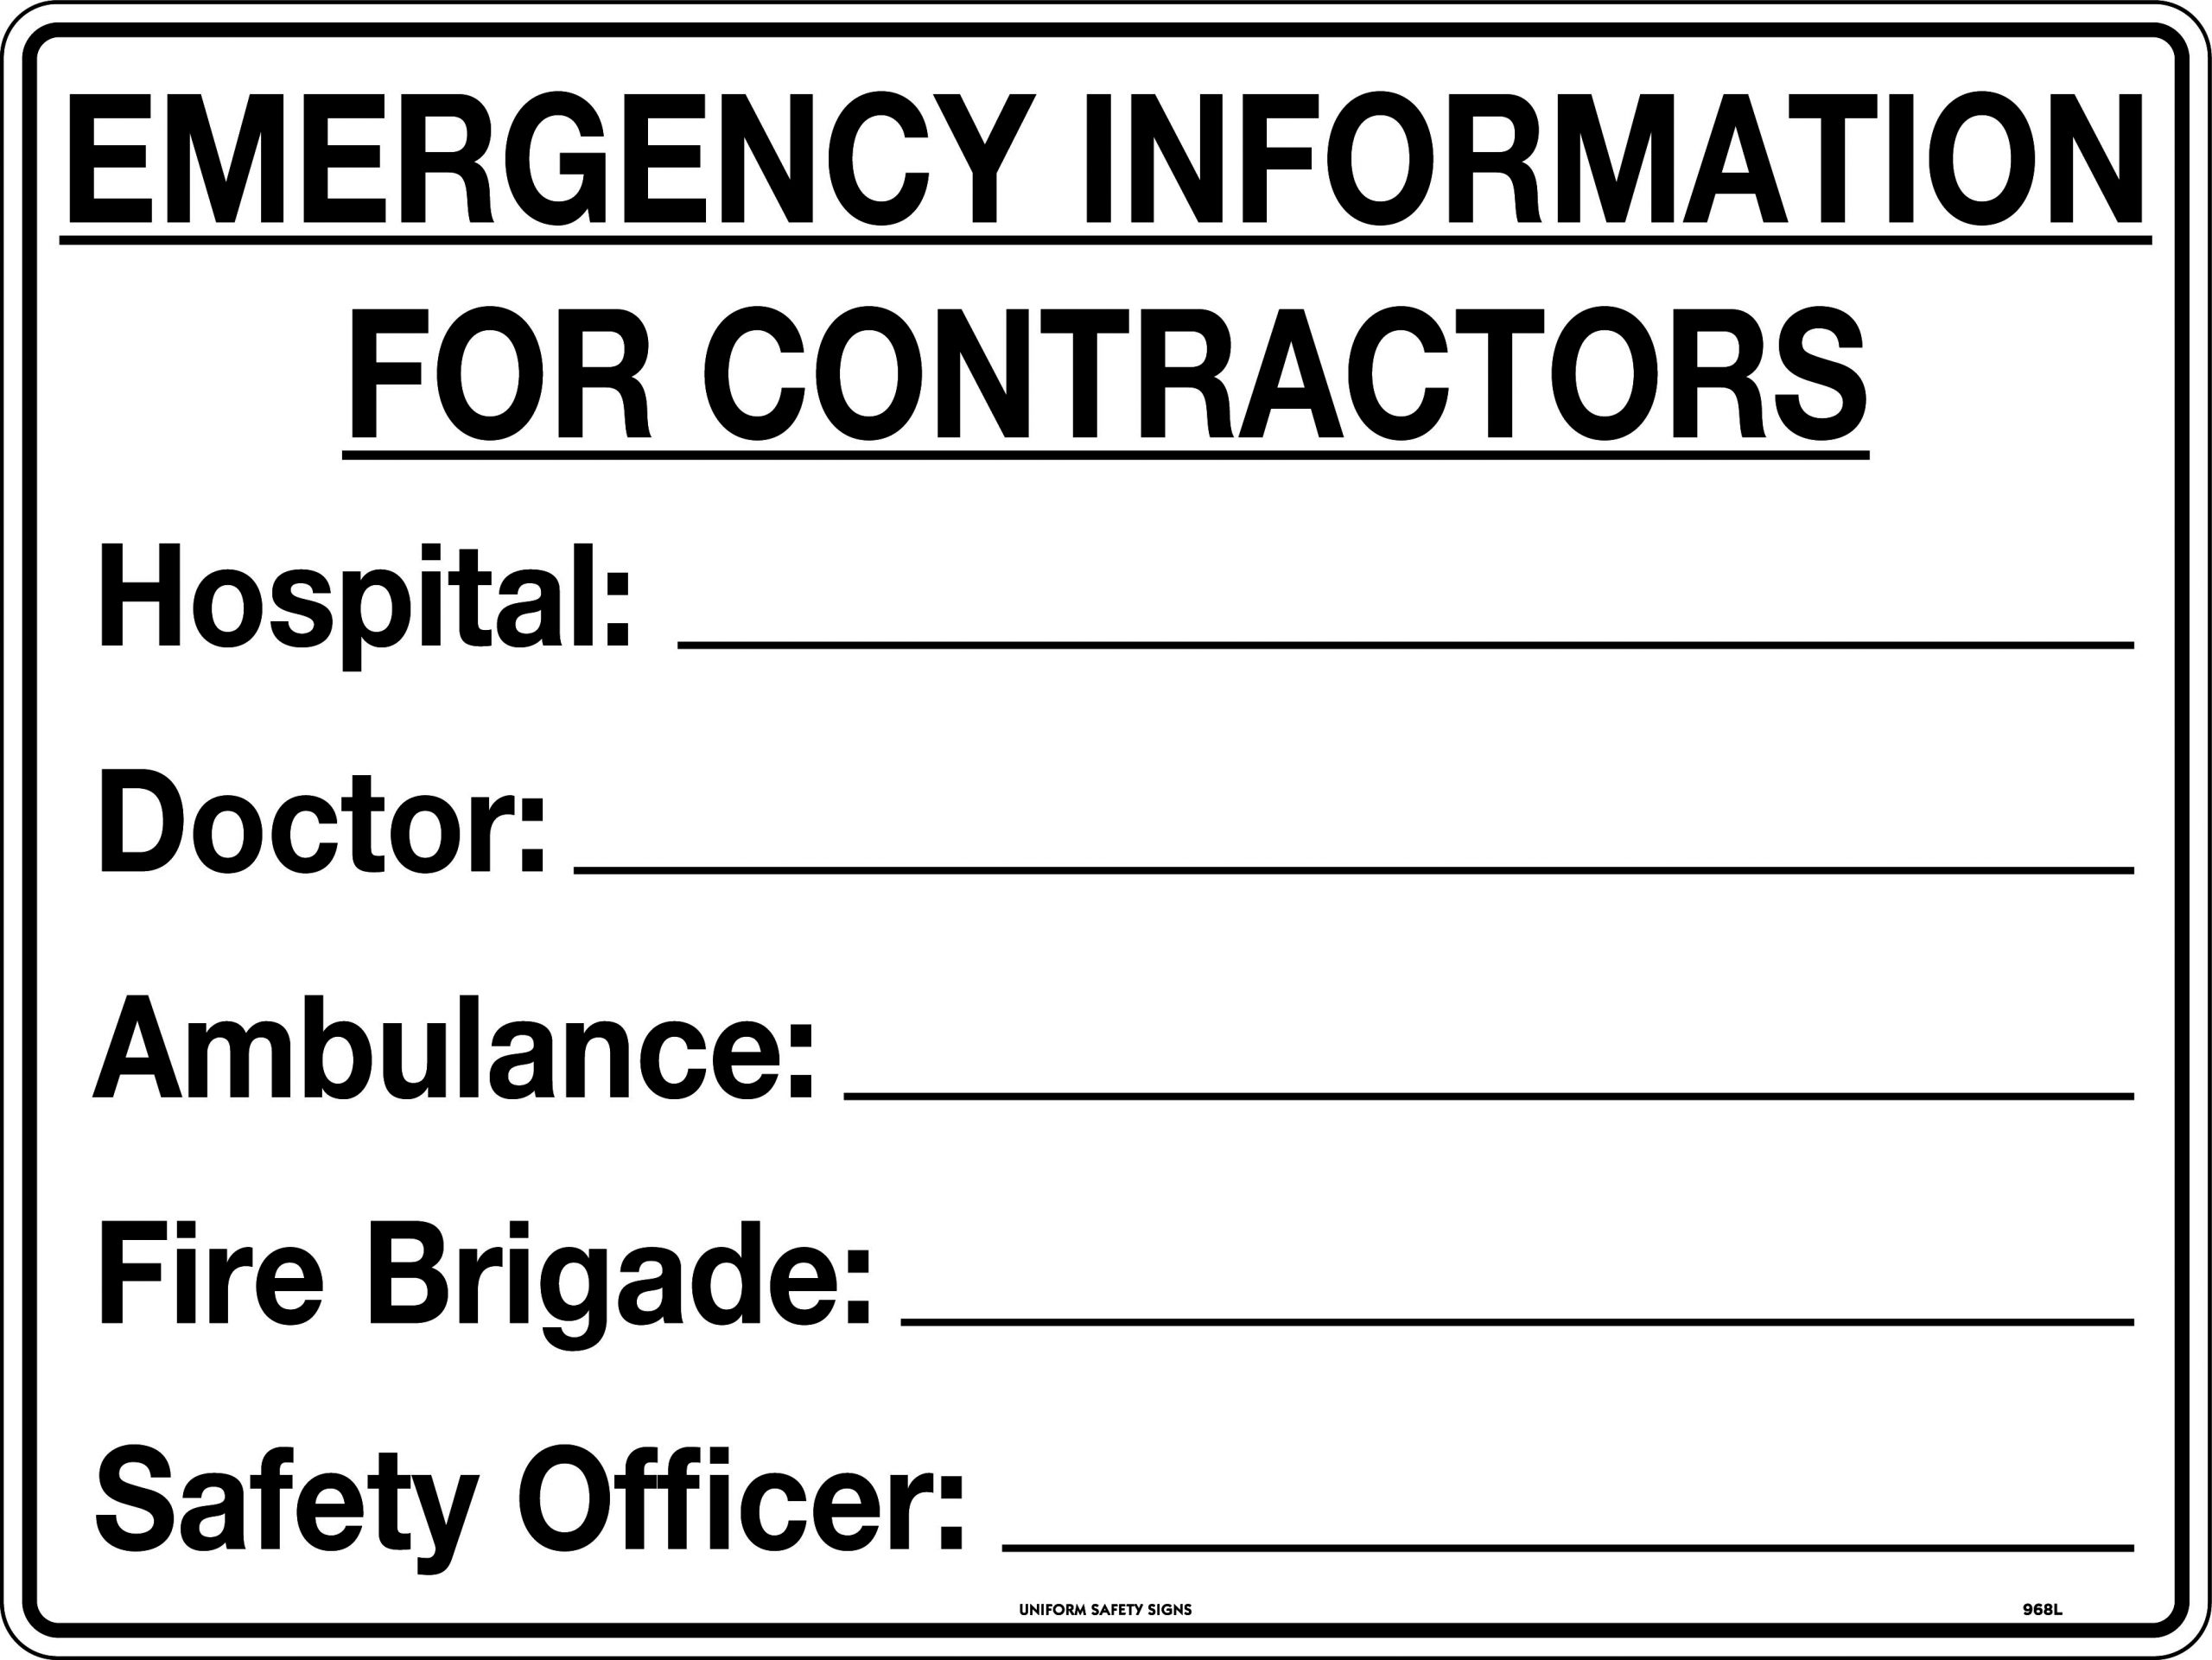 UNIFORM SAFETY 600X450MM POLY EMERGENCY INFORMATION FOR CONTRACTORS